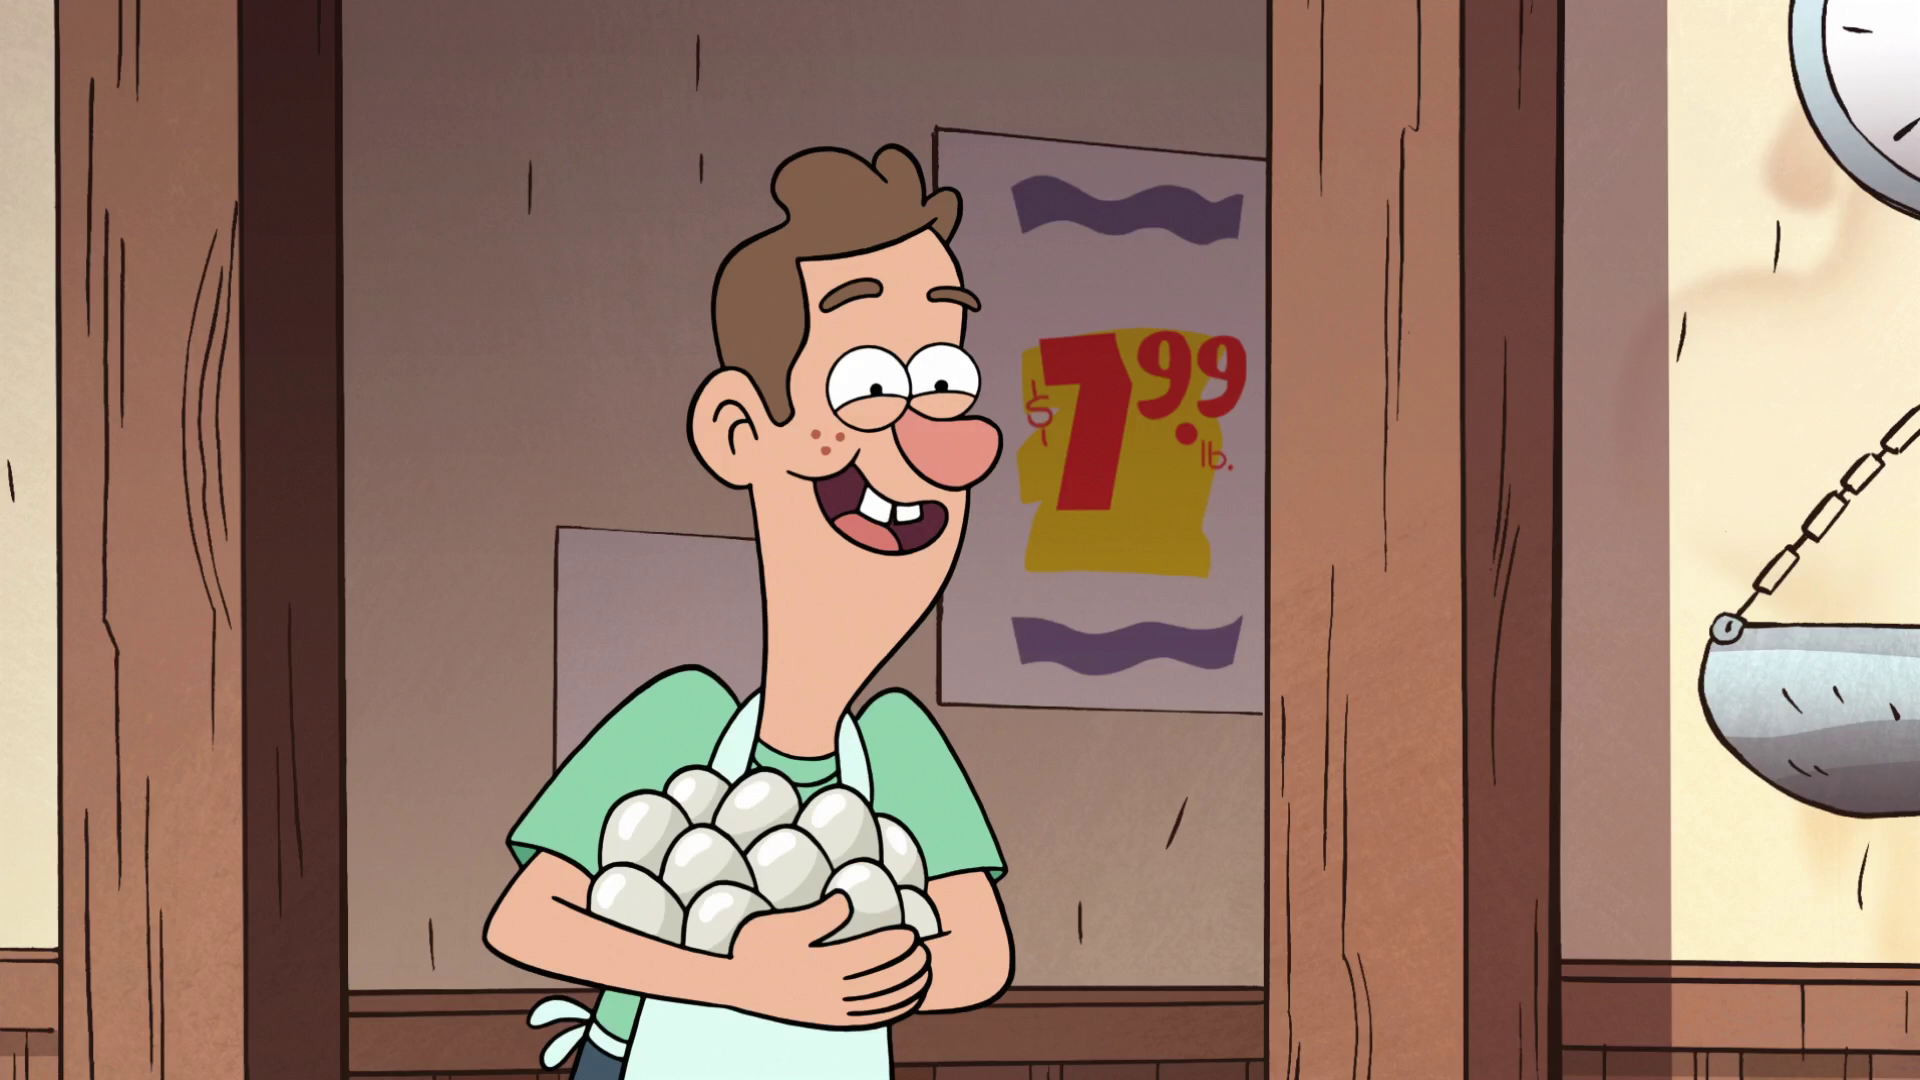 https://static.wikia.nocookie.net/gravityfalls/images/c/c1/S2e6_jimmy.png/revision/latest?cb=20141006011506